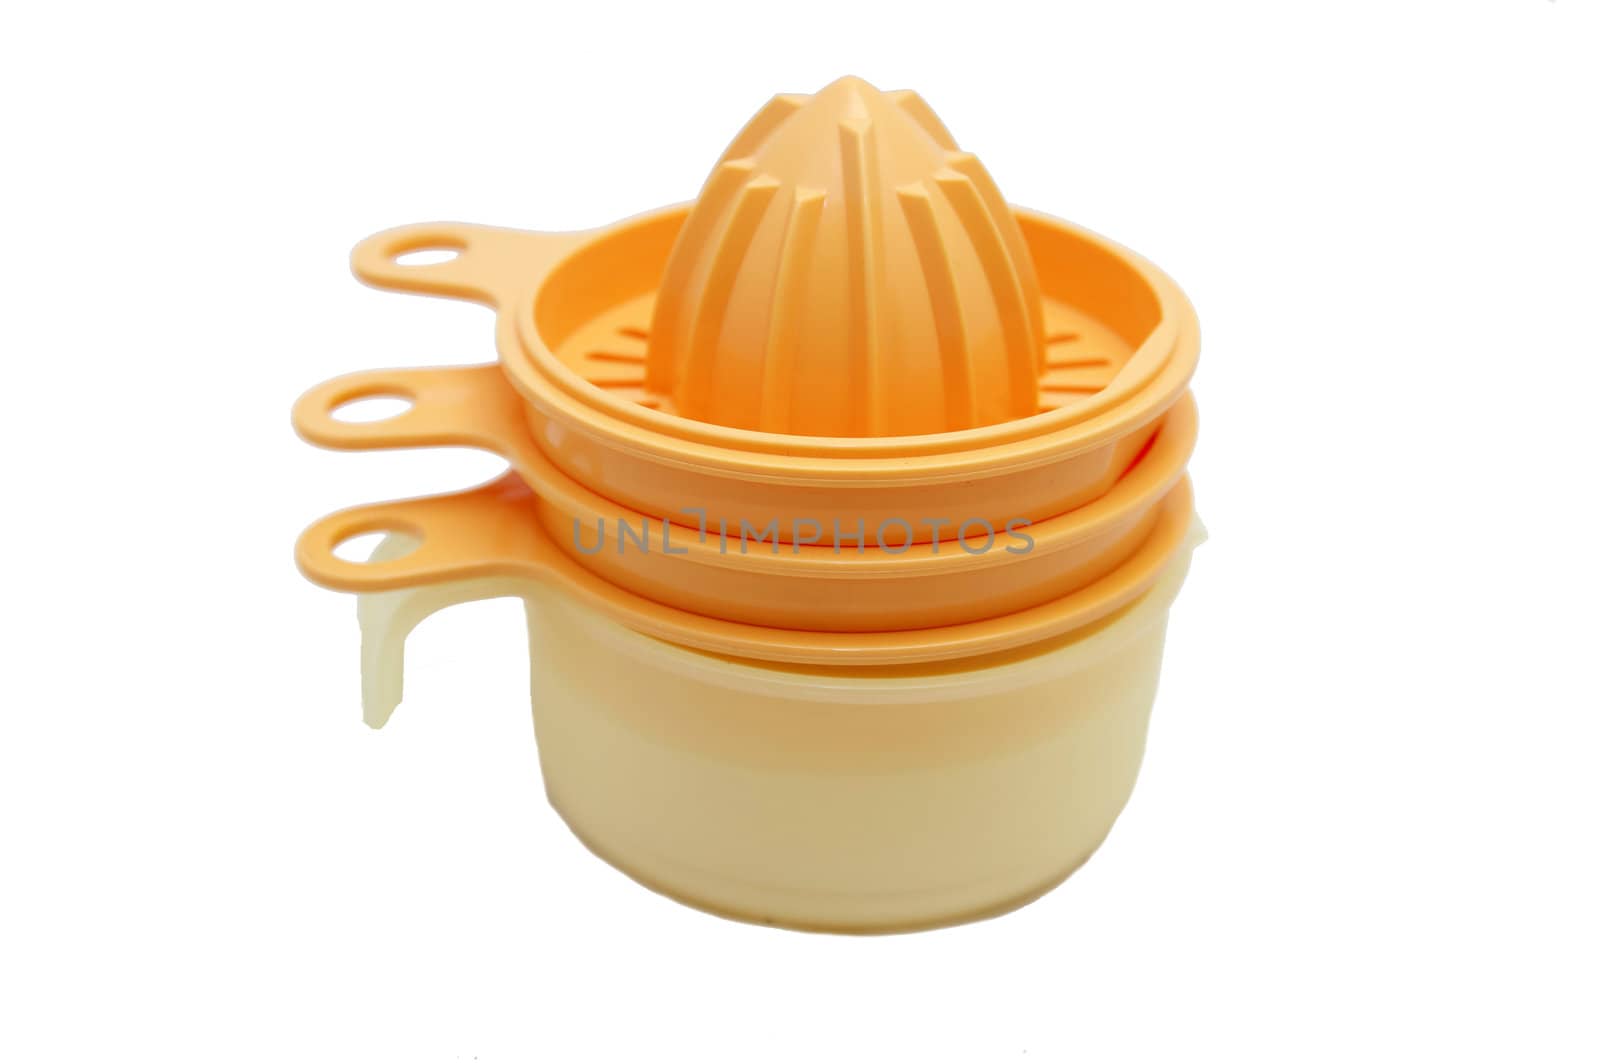 home plastic juicer on a white background